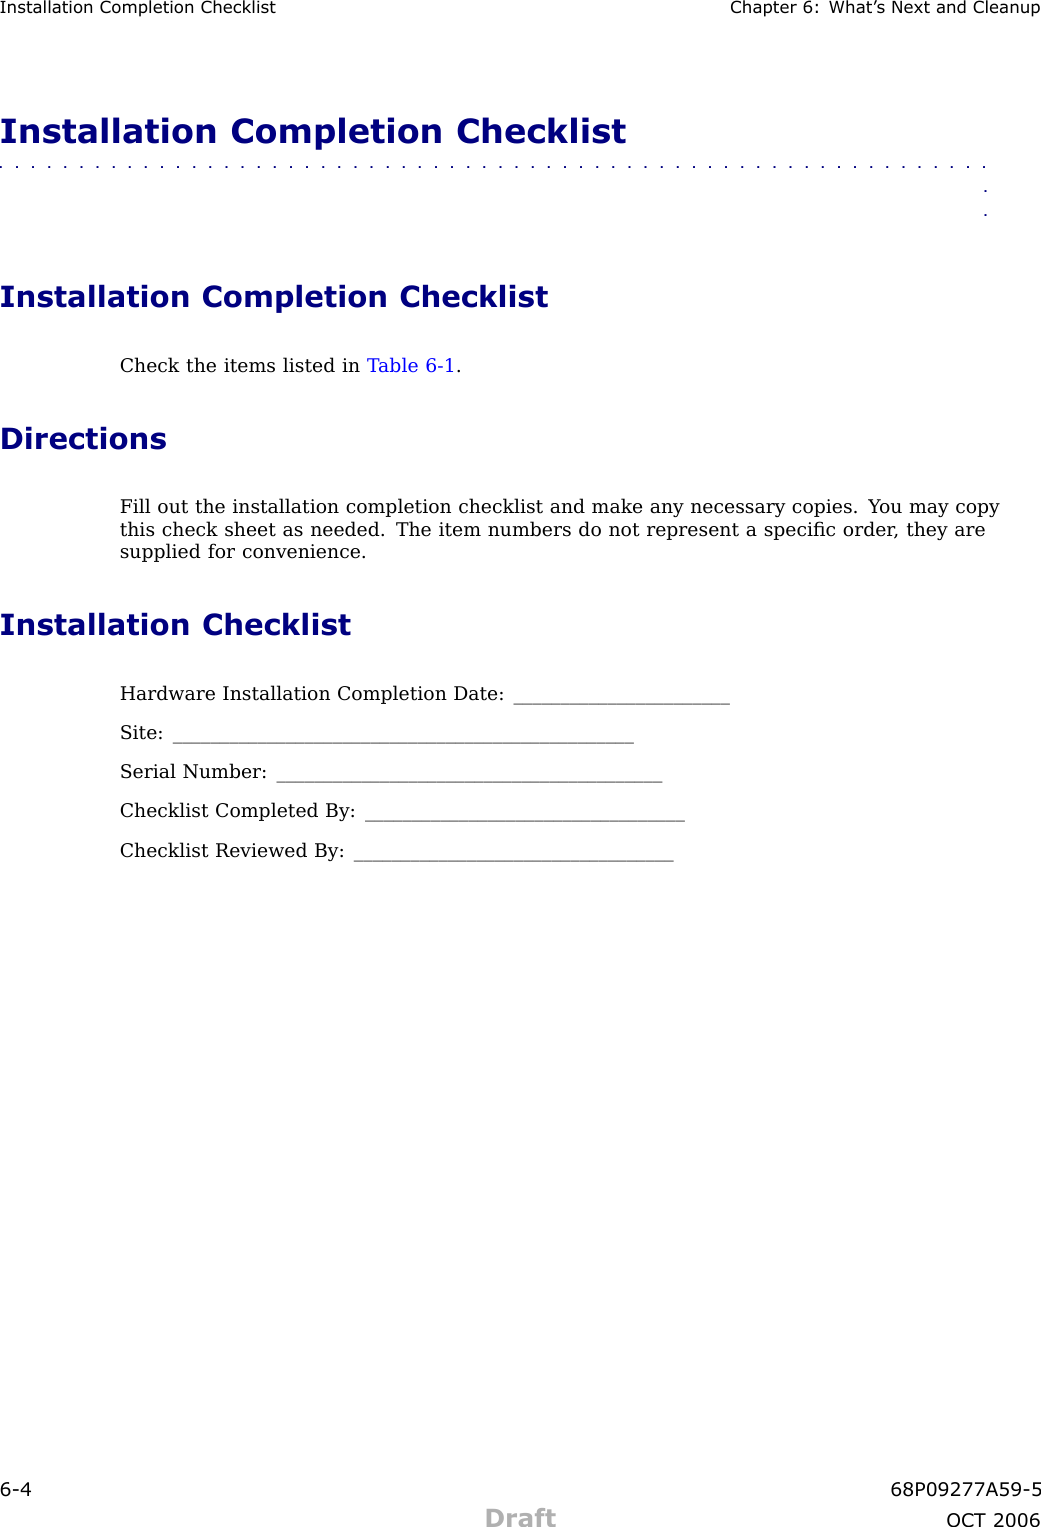 Installation Completion Checklist Chapter 6: What ’ s Next and CleanupInstallation Completion Checklist■■■■■■■■■■■■■■■■■■■■■■■■■■■■■■■■■■■■■■■■■■■■■■■■■■■■■■■■■■■■■■■■Installation Completion ChecklistCheck the items listed in T able 6 -1 .DirectionsFill out the installation completion checklist and make any necessary copies. Y ou may copythis check sheet as needed. The item numbers do not represent a speciﬁc order , they aresupplied for convenience.Installation ChecklistHardware Installation Completion Date: _______________________Site: _________________________________________________Serial Number: _________________________________________Checklist Completed By: __________________________________Checklist Reviewed By: __________________________________6 -4 68P09277A59 -5Draft OCT 2006